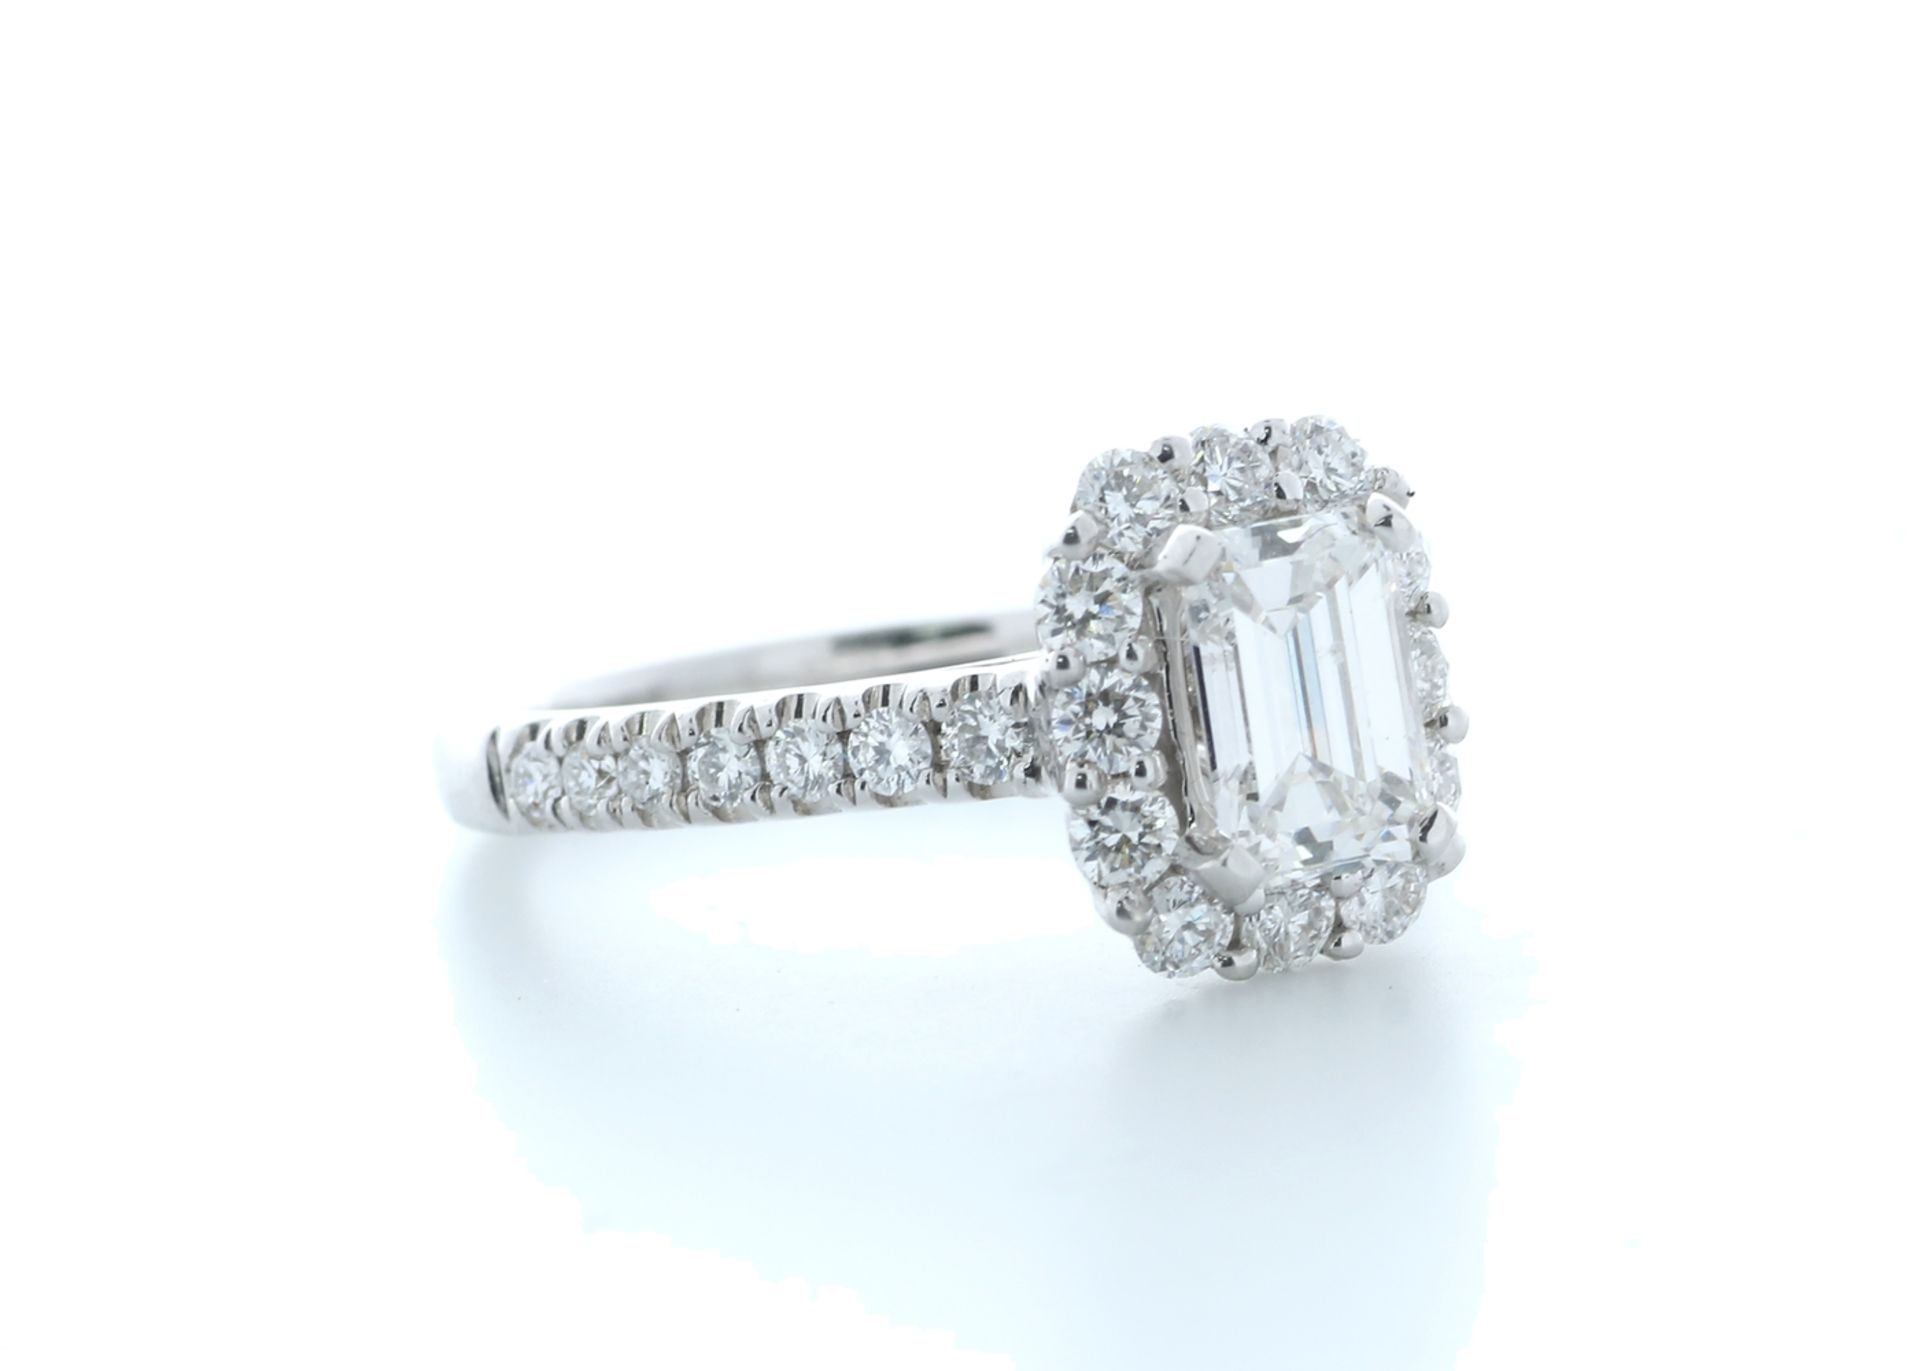 18ct White Gold Single Stone With Halo Setting Ring 1.79 (1.07) Carats - Valued by IDI £26,000. - Image 2 of 5